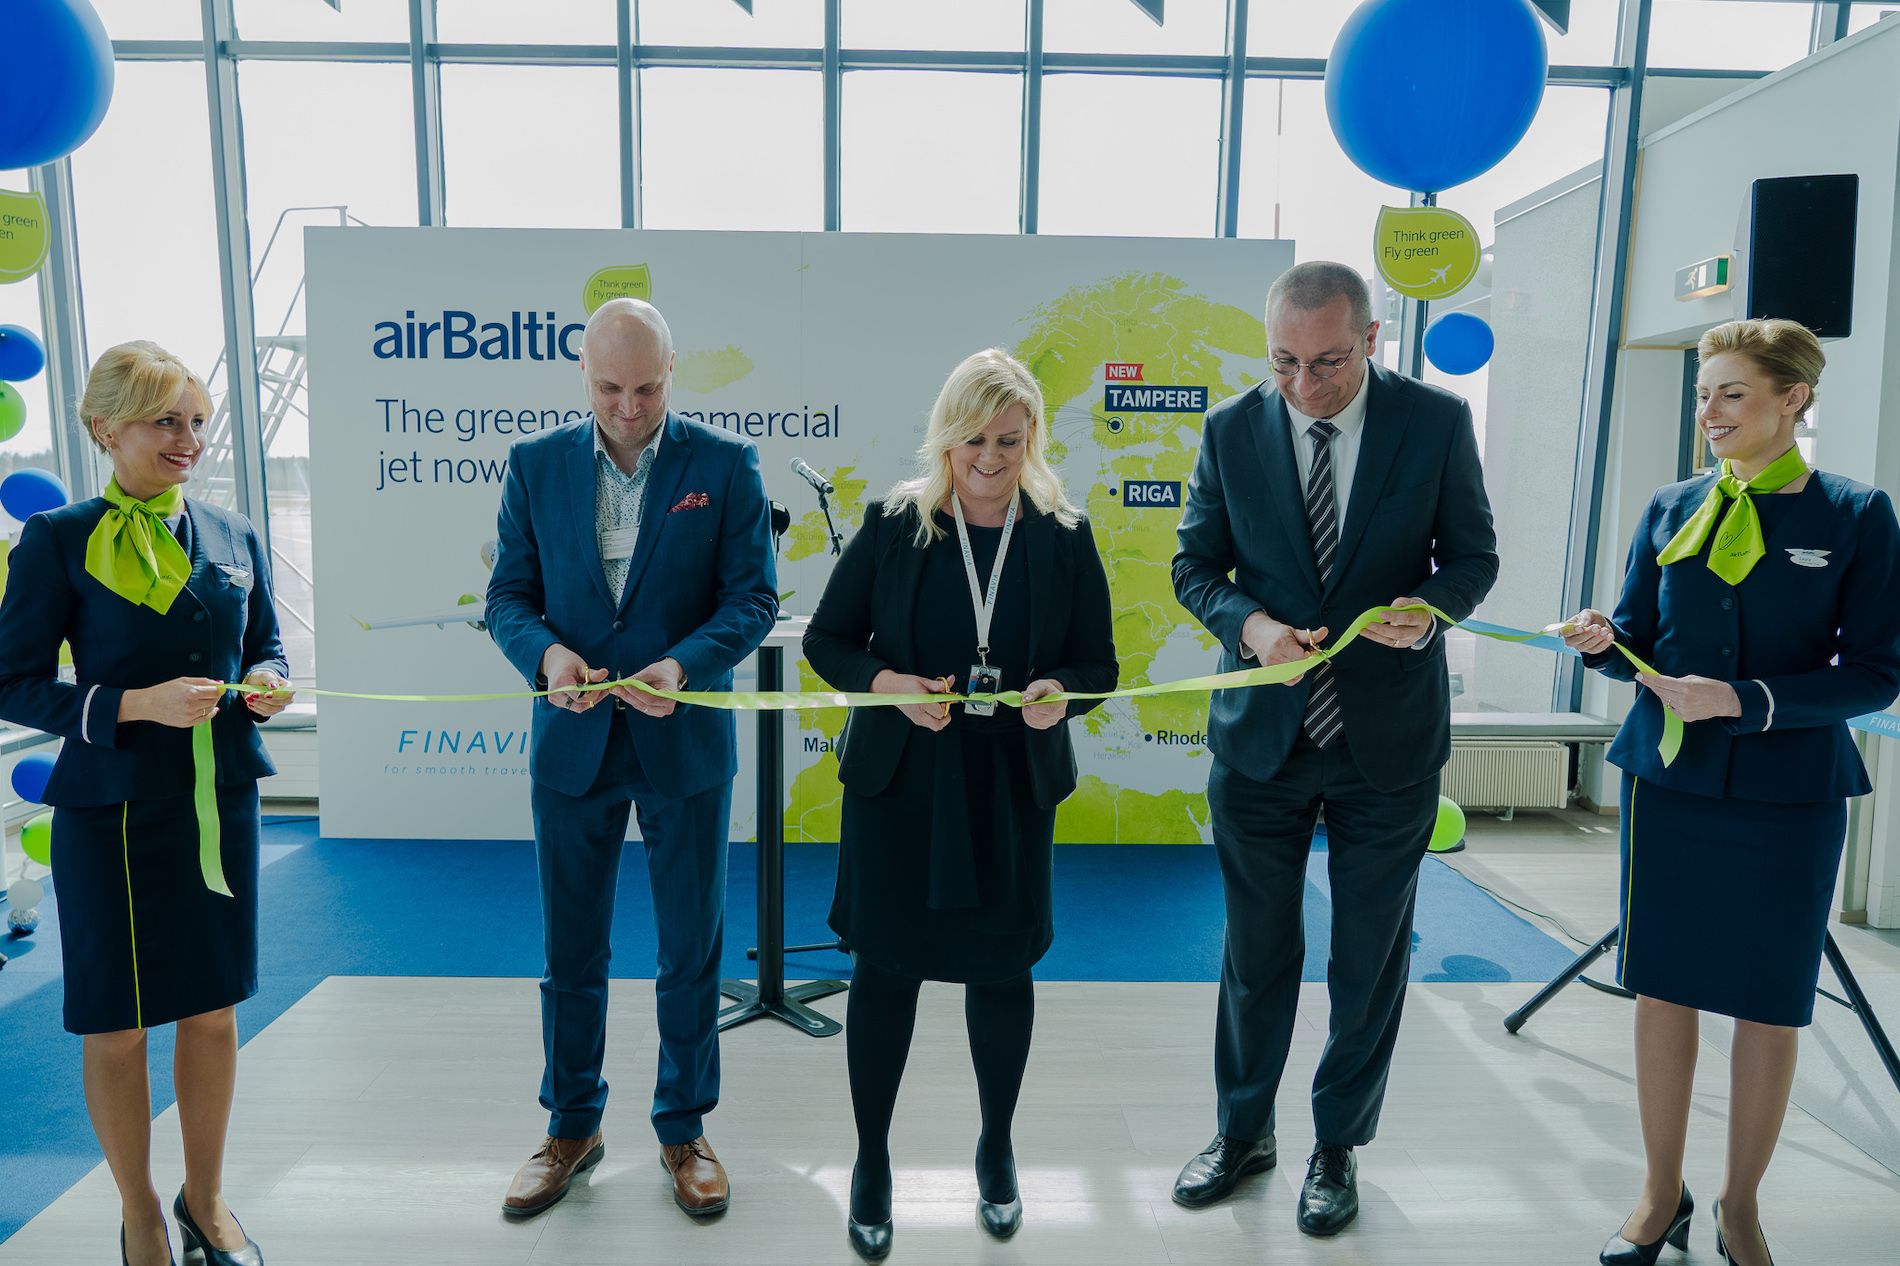 airBaltic Tampere ribbon cutting